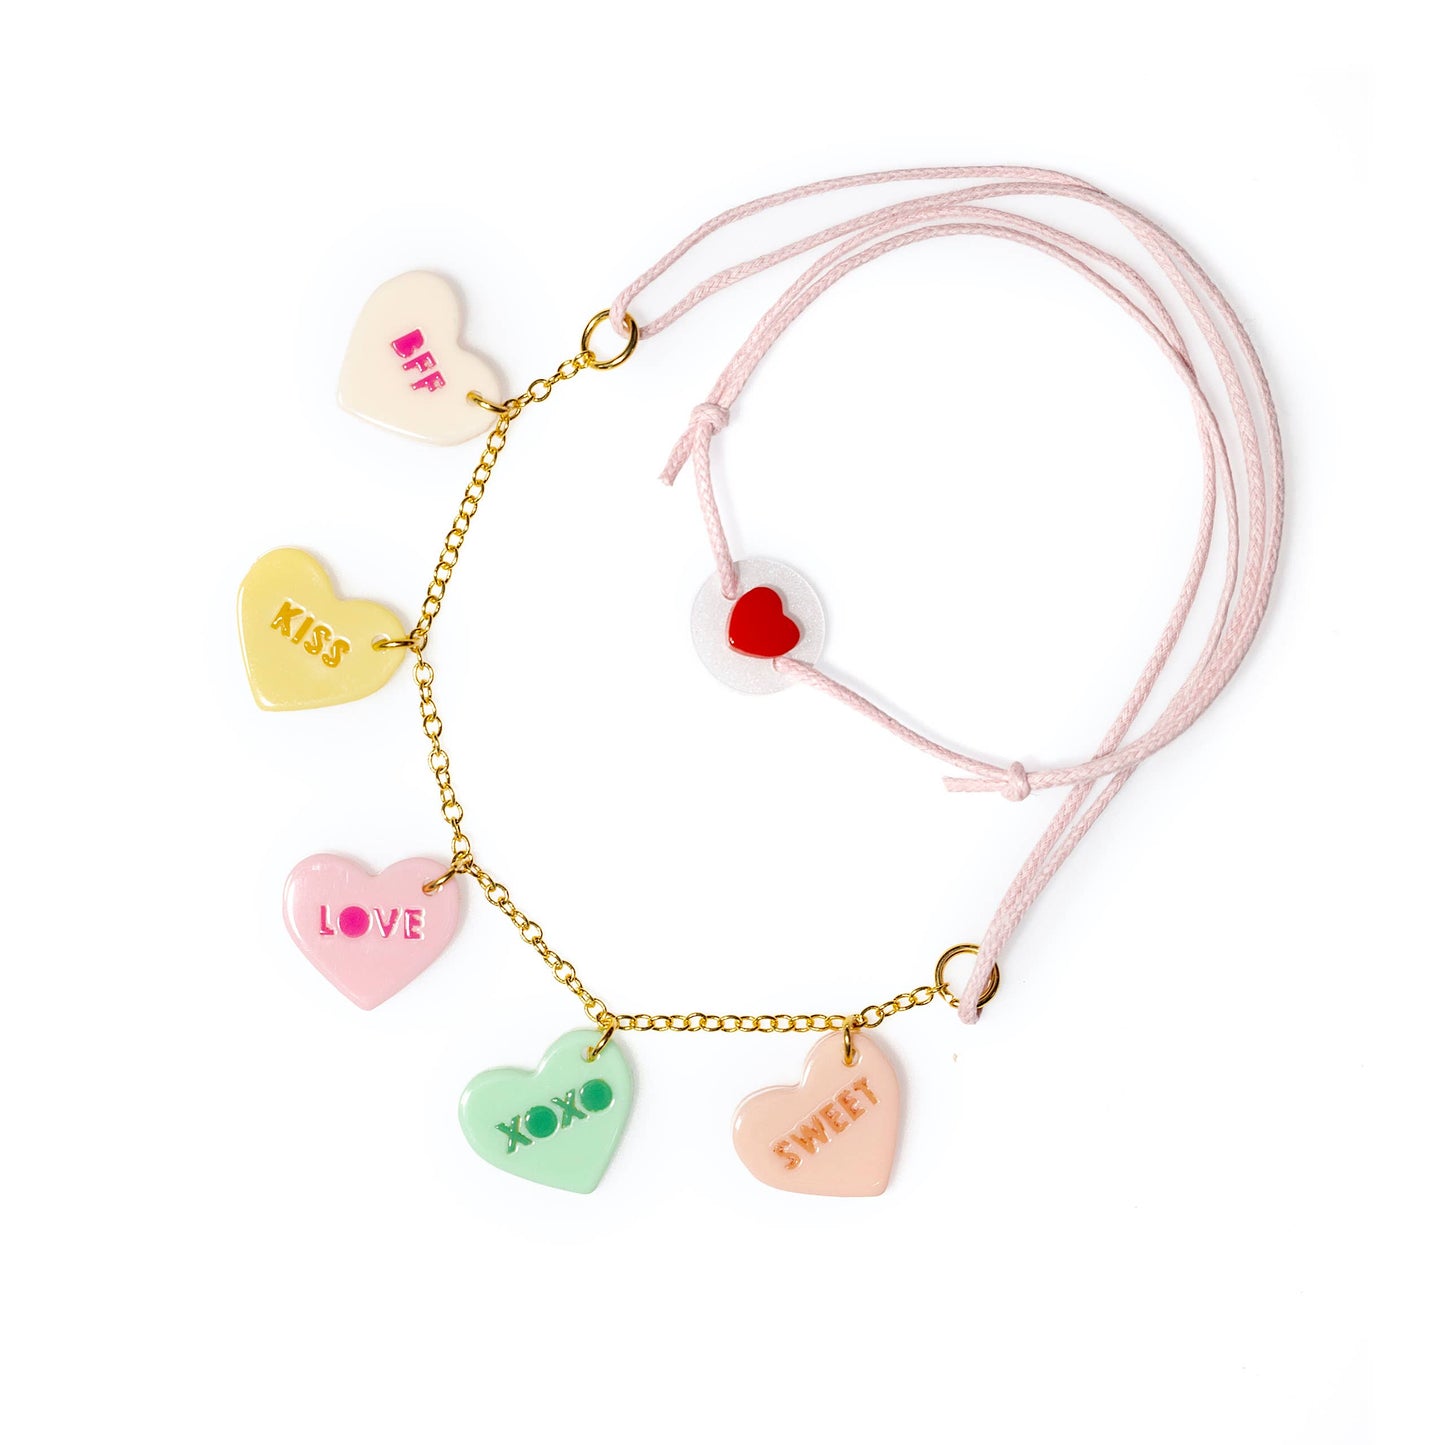 Lilies & Roses NY - Multi Heart Candy Necklace